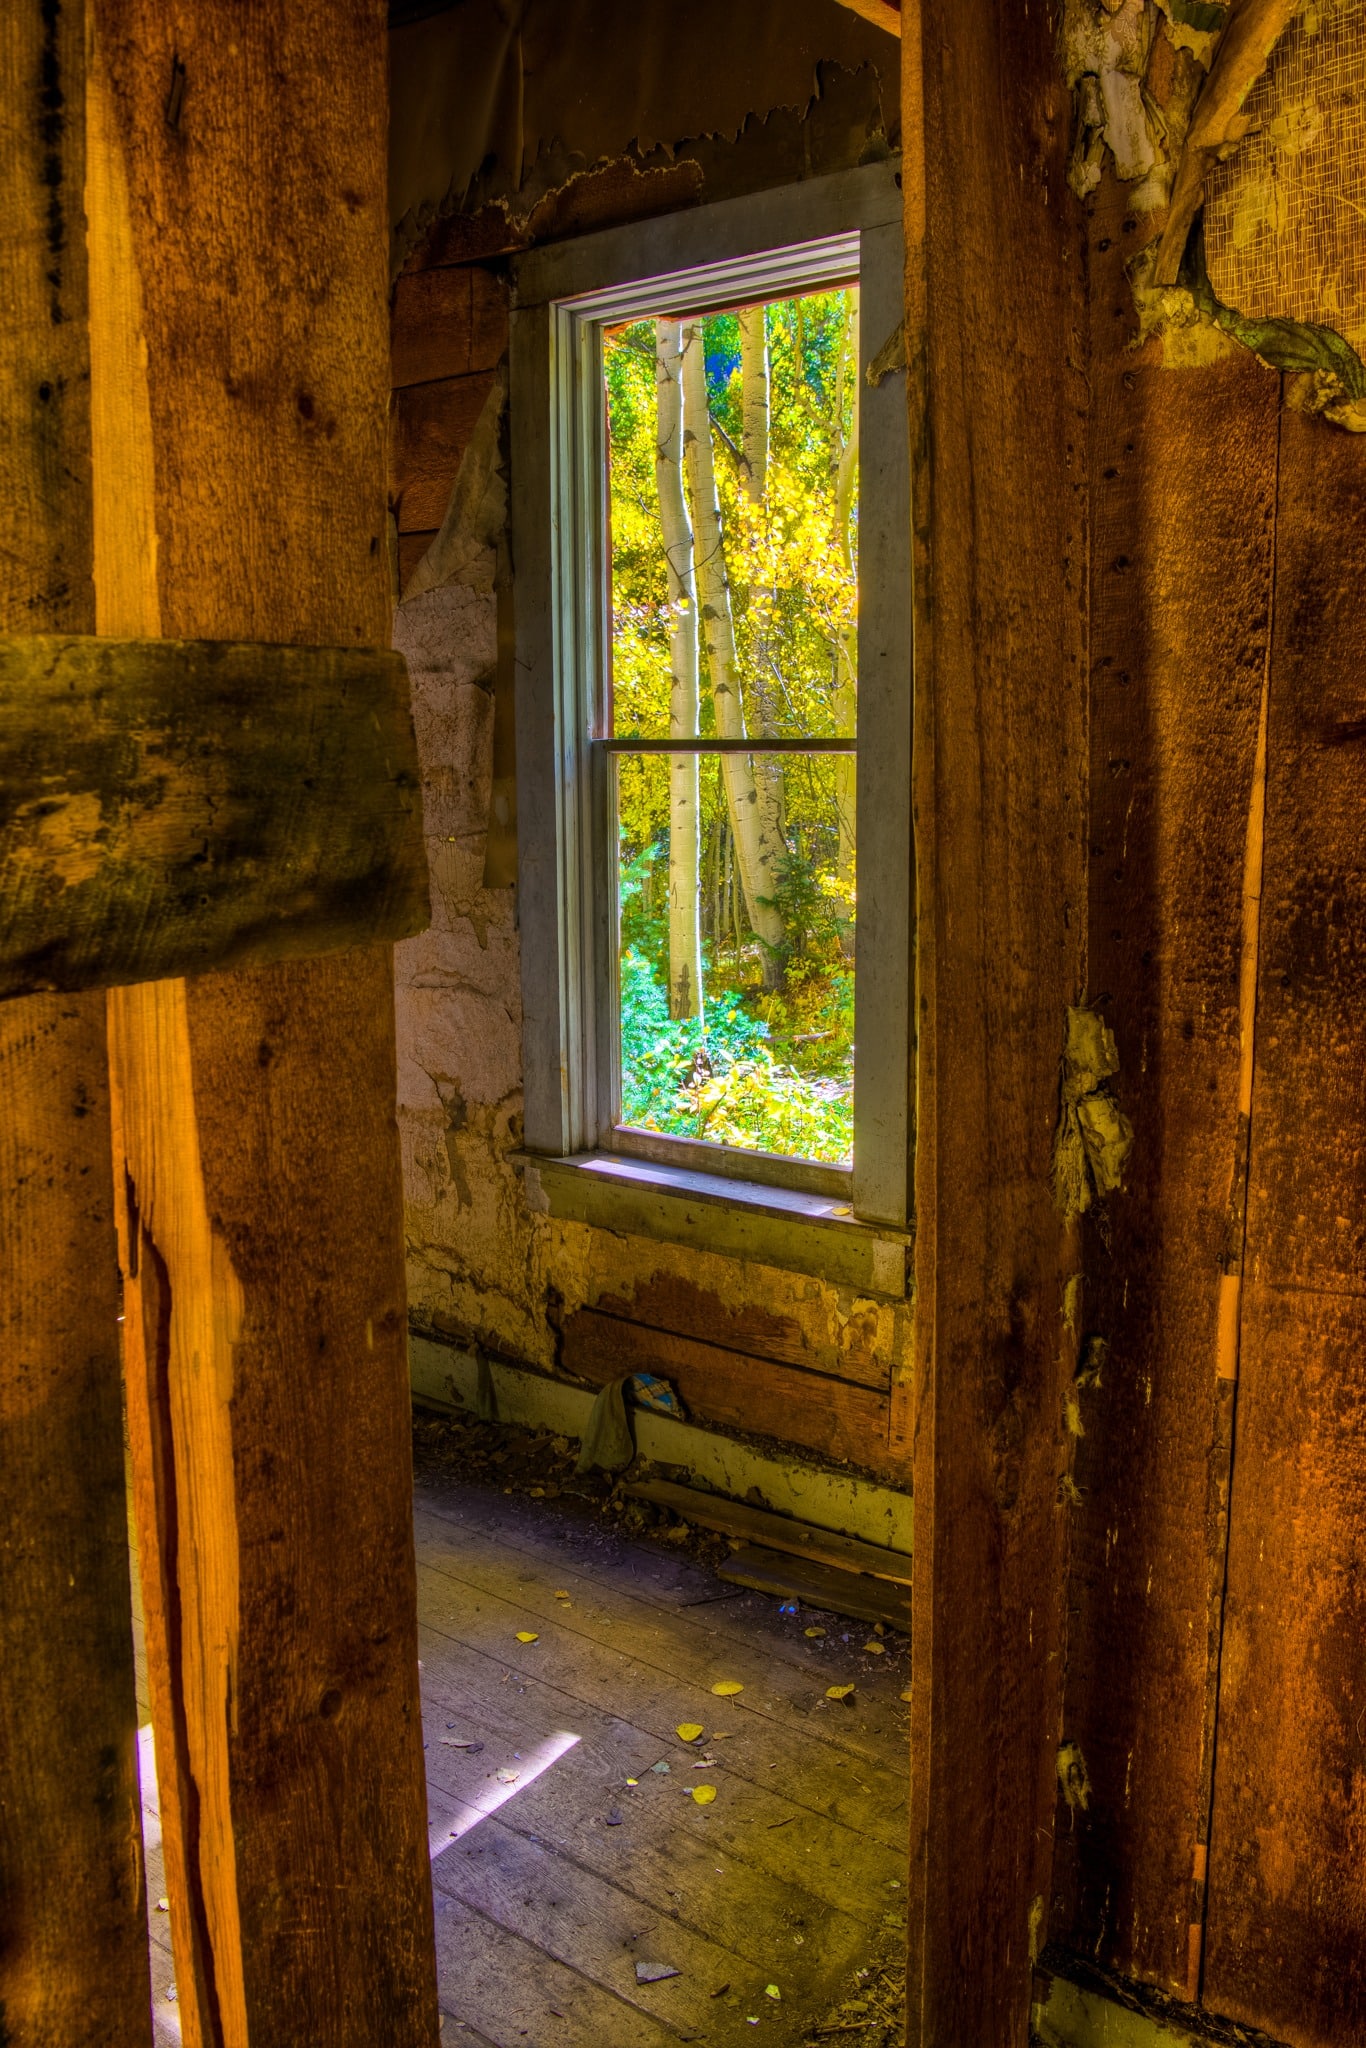 Sunlit aspens are visible through a window in an old house located at the Ironton Town Site, off Highway 550 between Ouray and Silverton, Colorado.